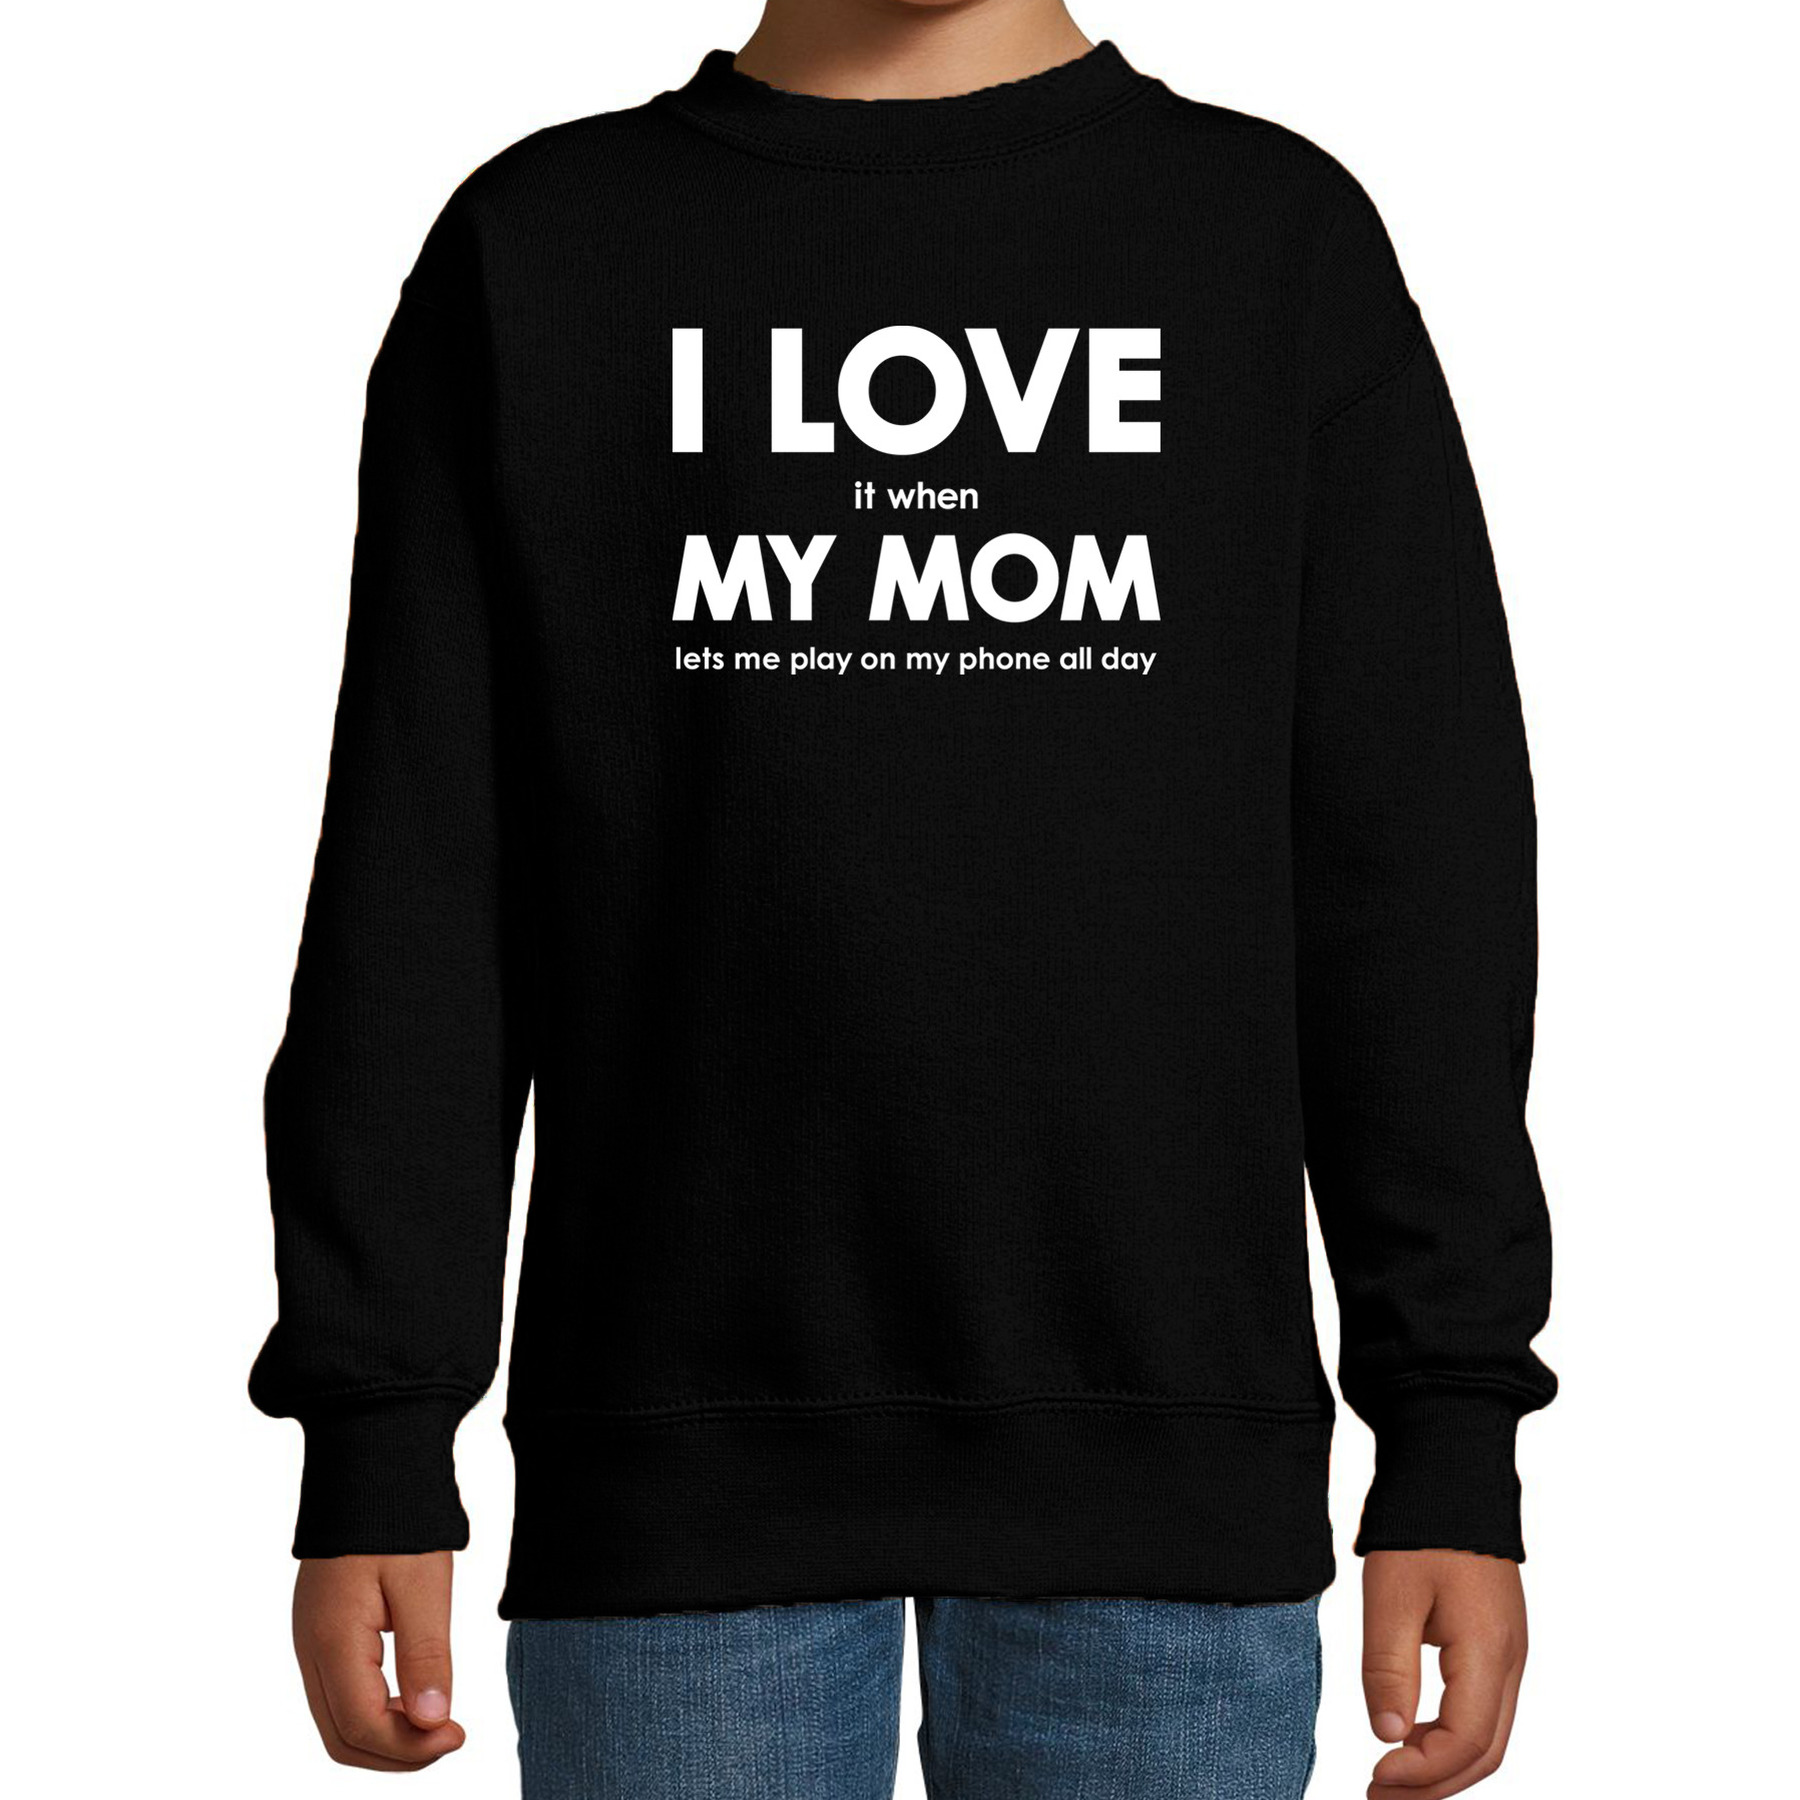 I love it when my mom lets me play on my phone all day sweater zwart voor kids